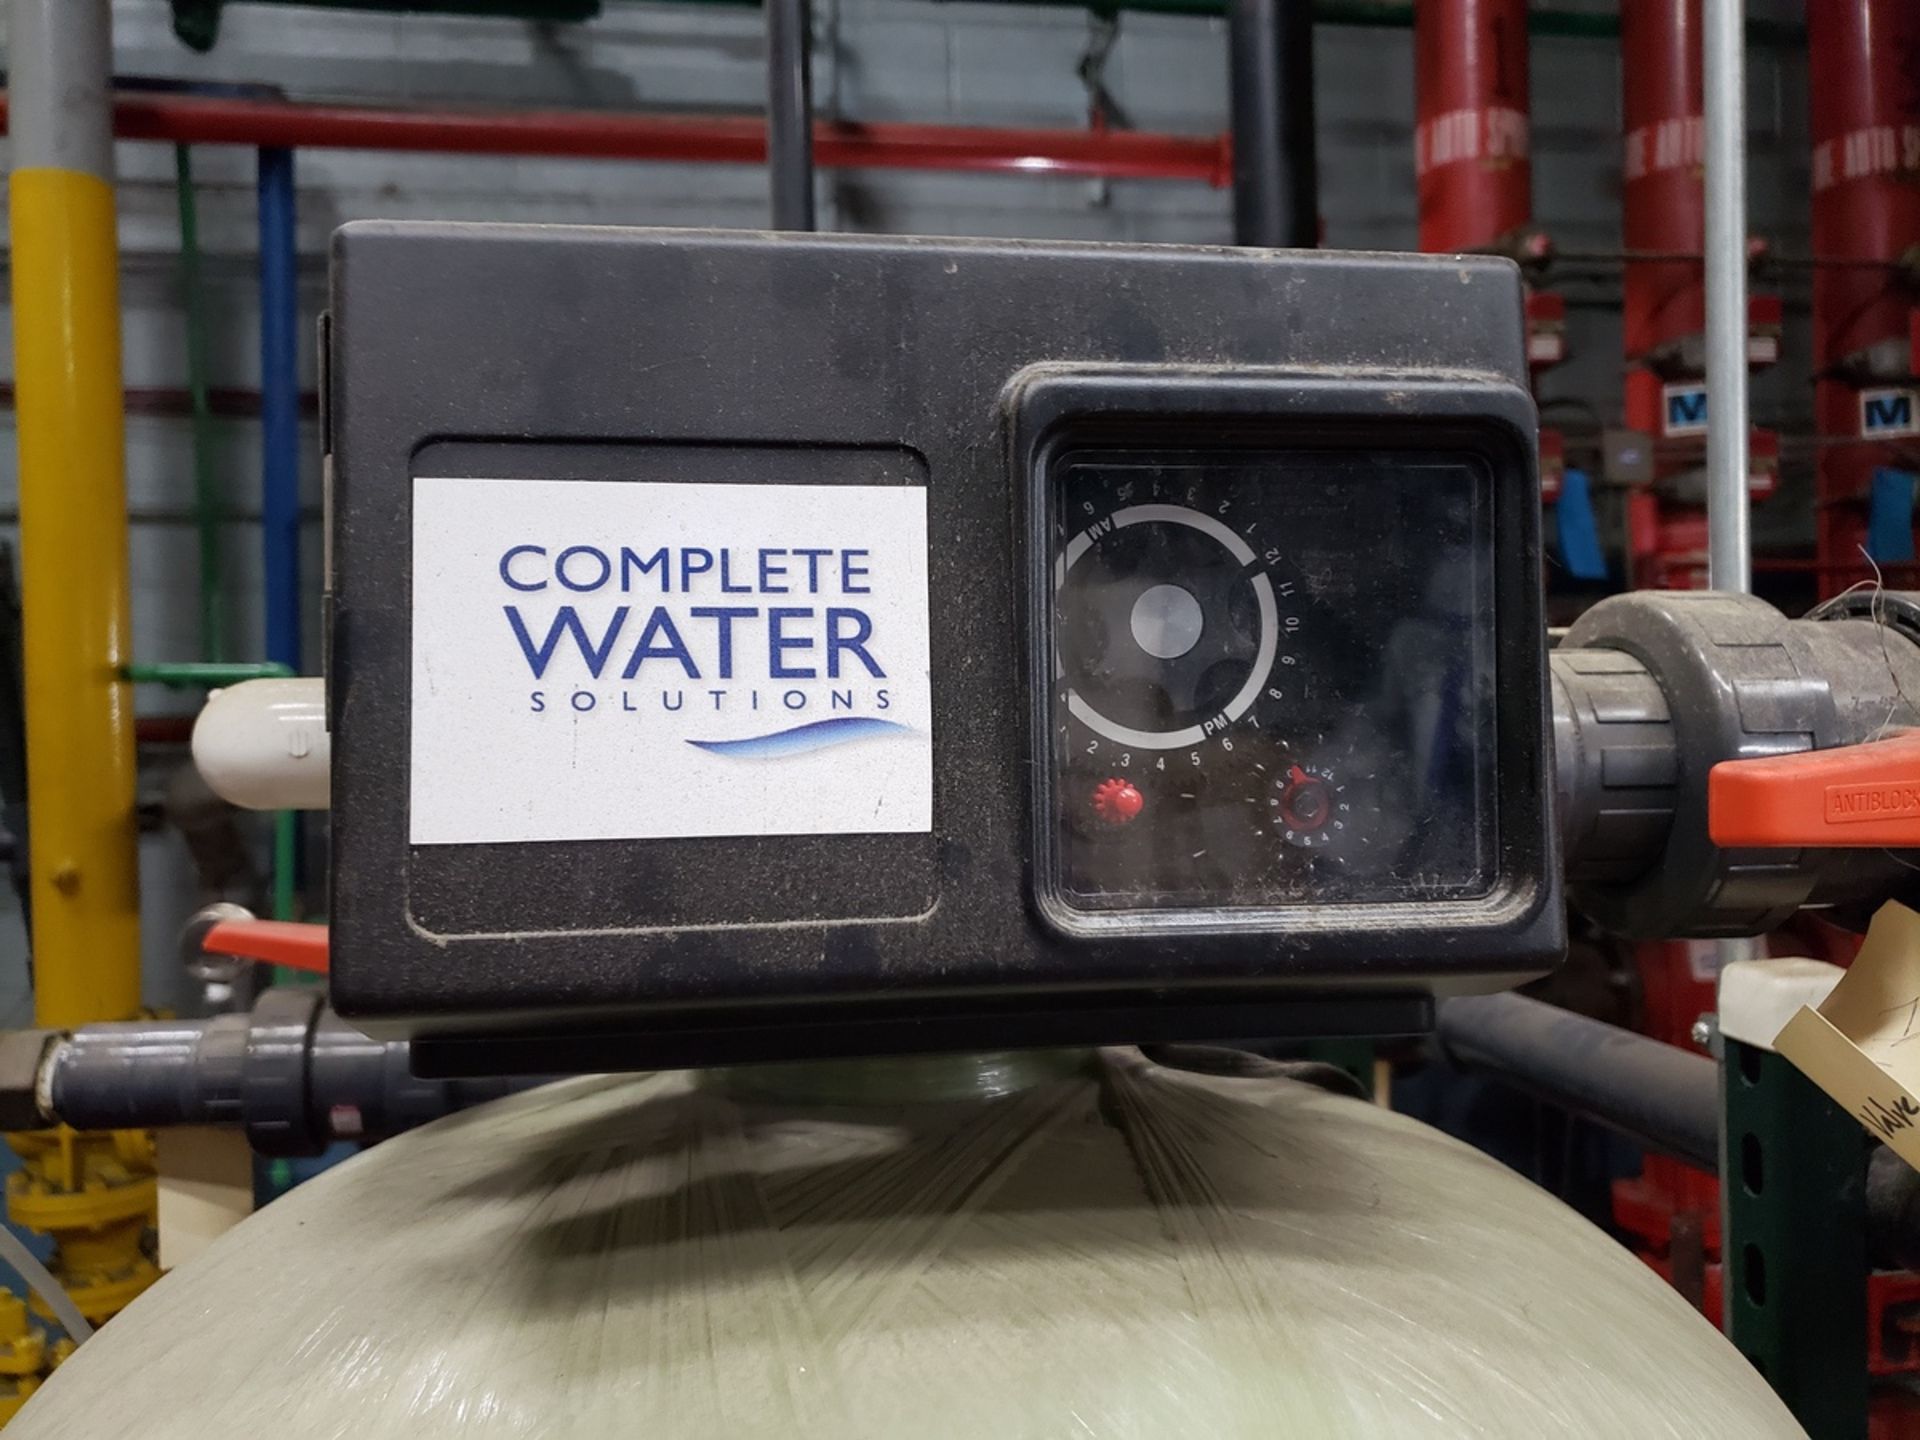 Complete Water Purification System | Rig Fee $150 - Image 5 of 8